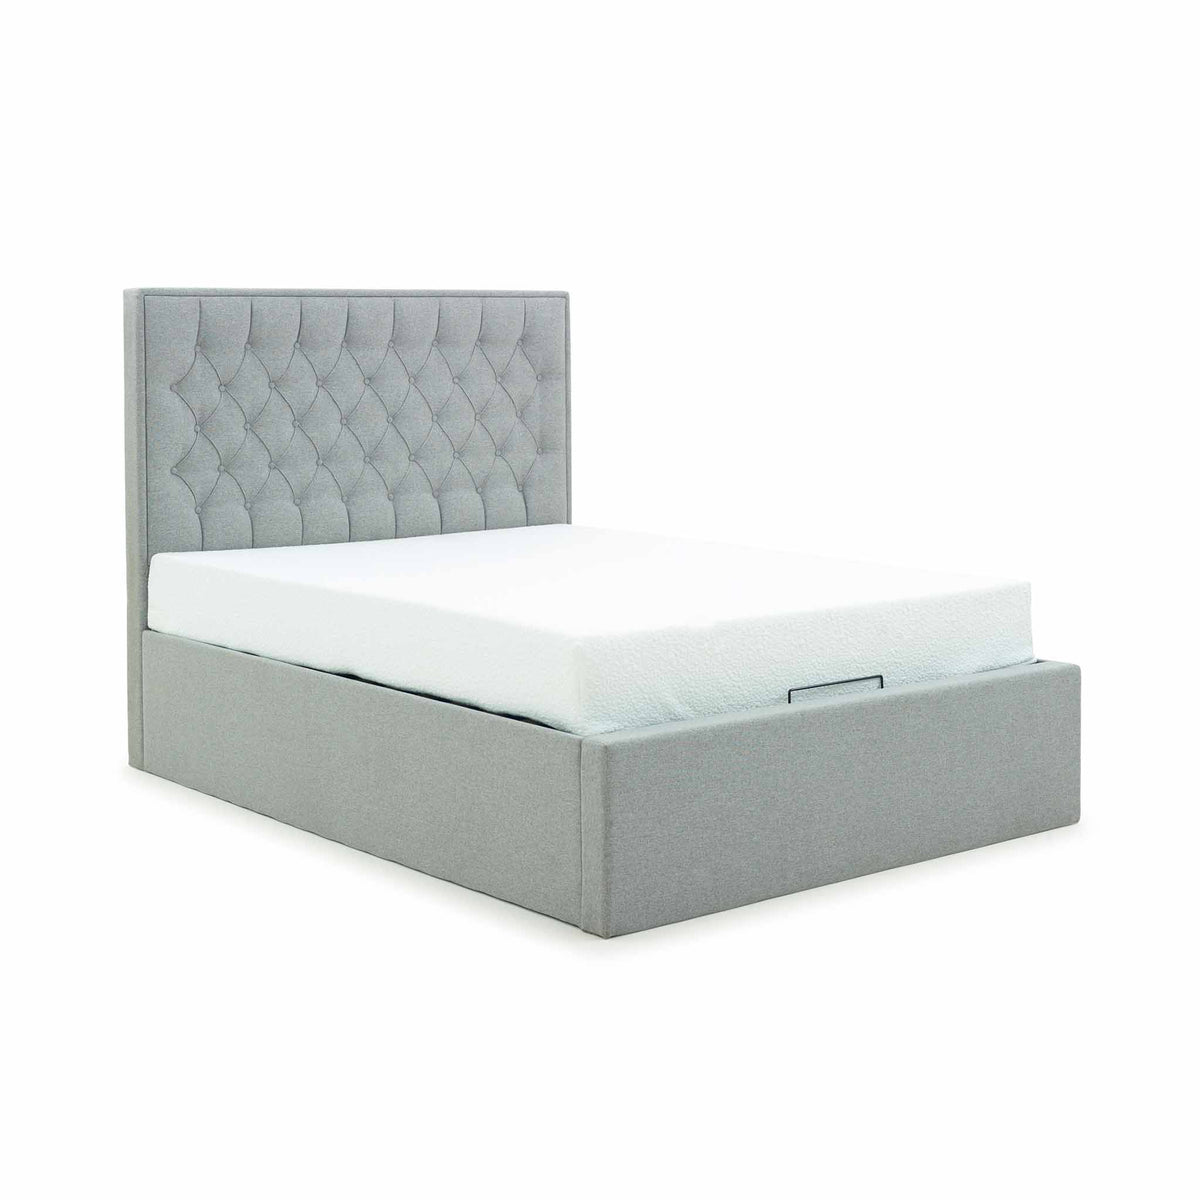 Sutton Grey Upholstered Fabric Ottoman Storage Double Bed from Roseland Furniture